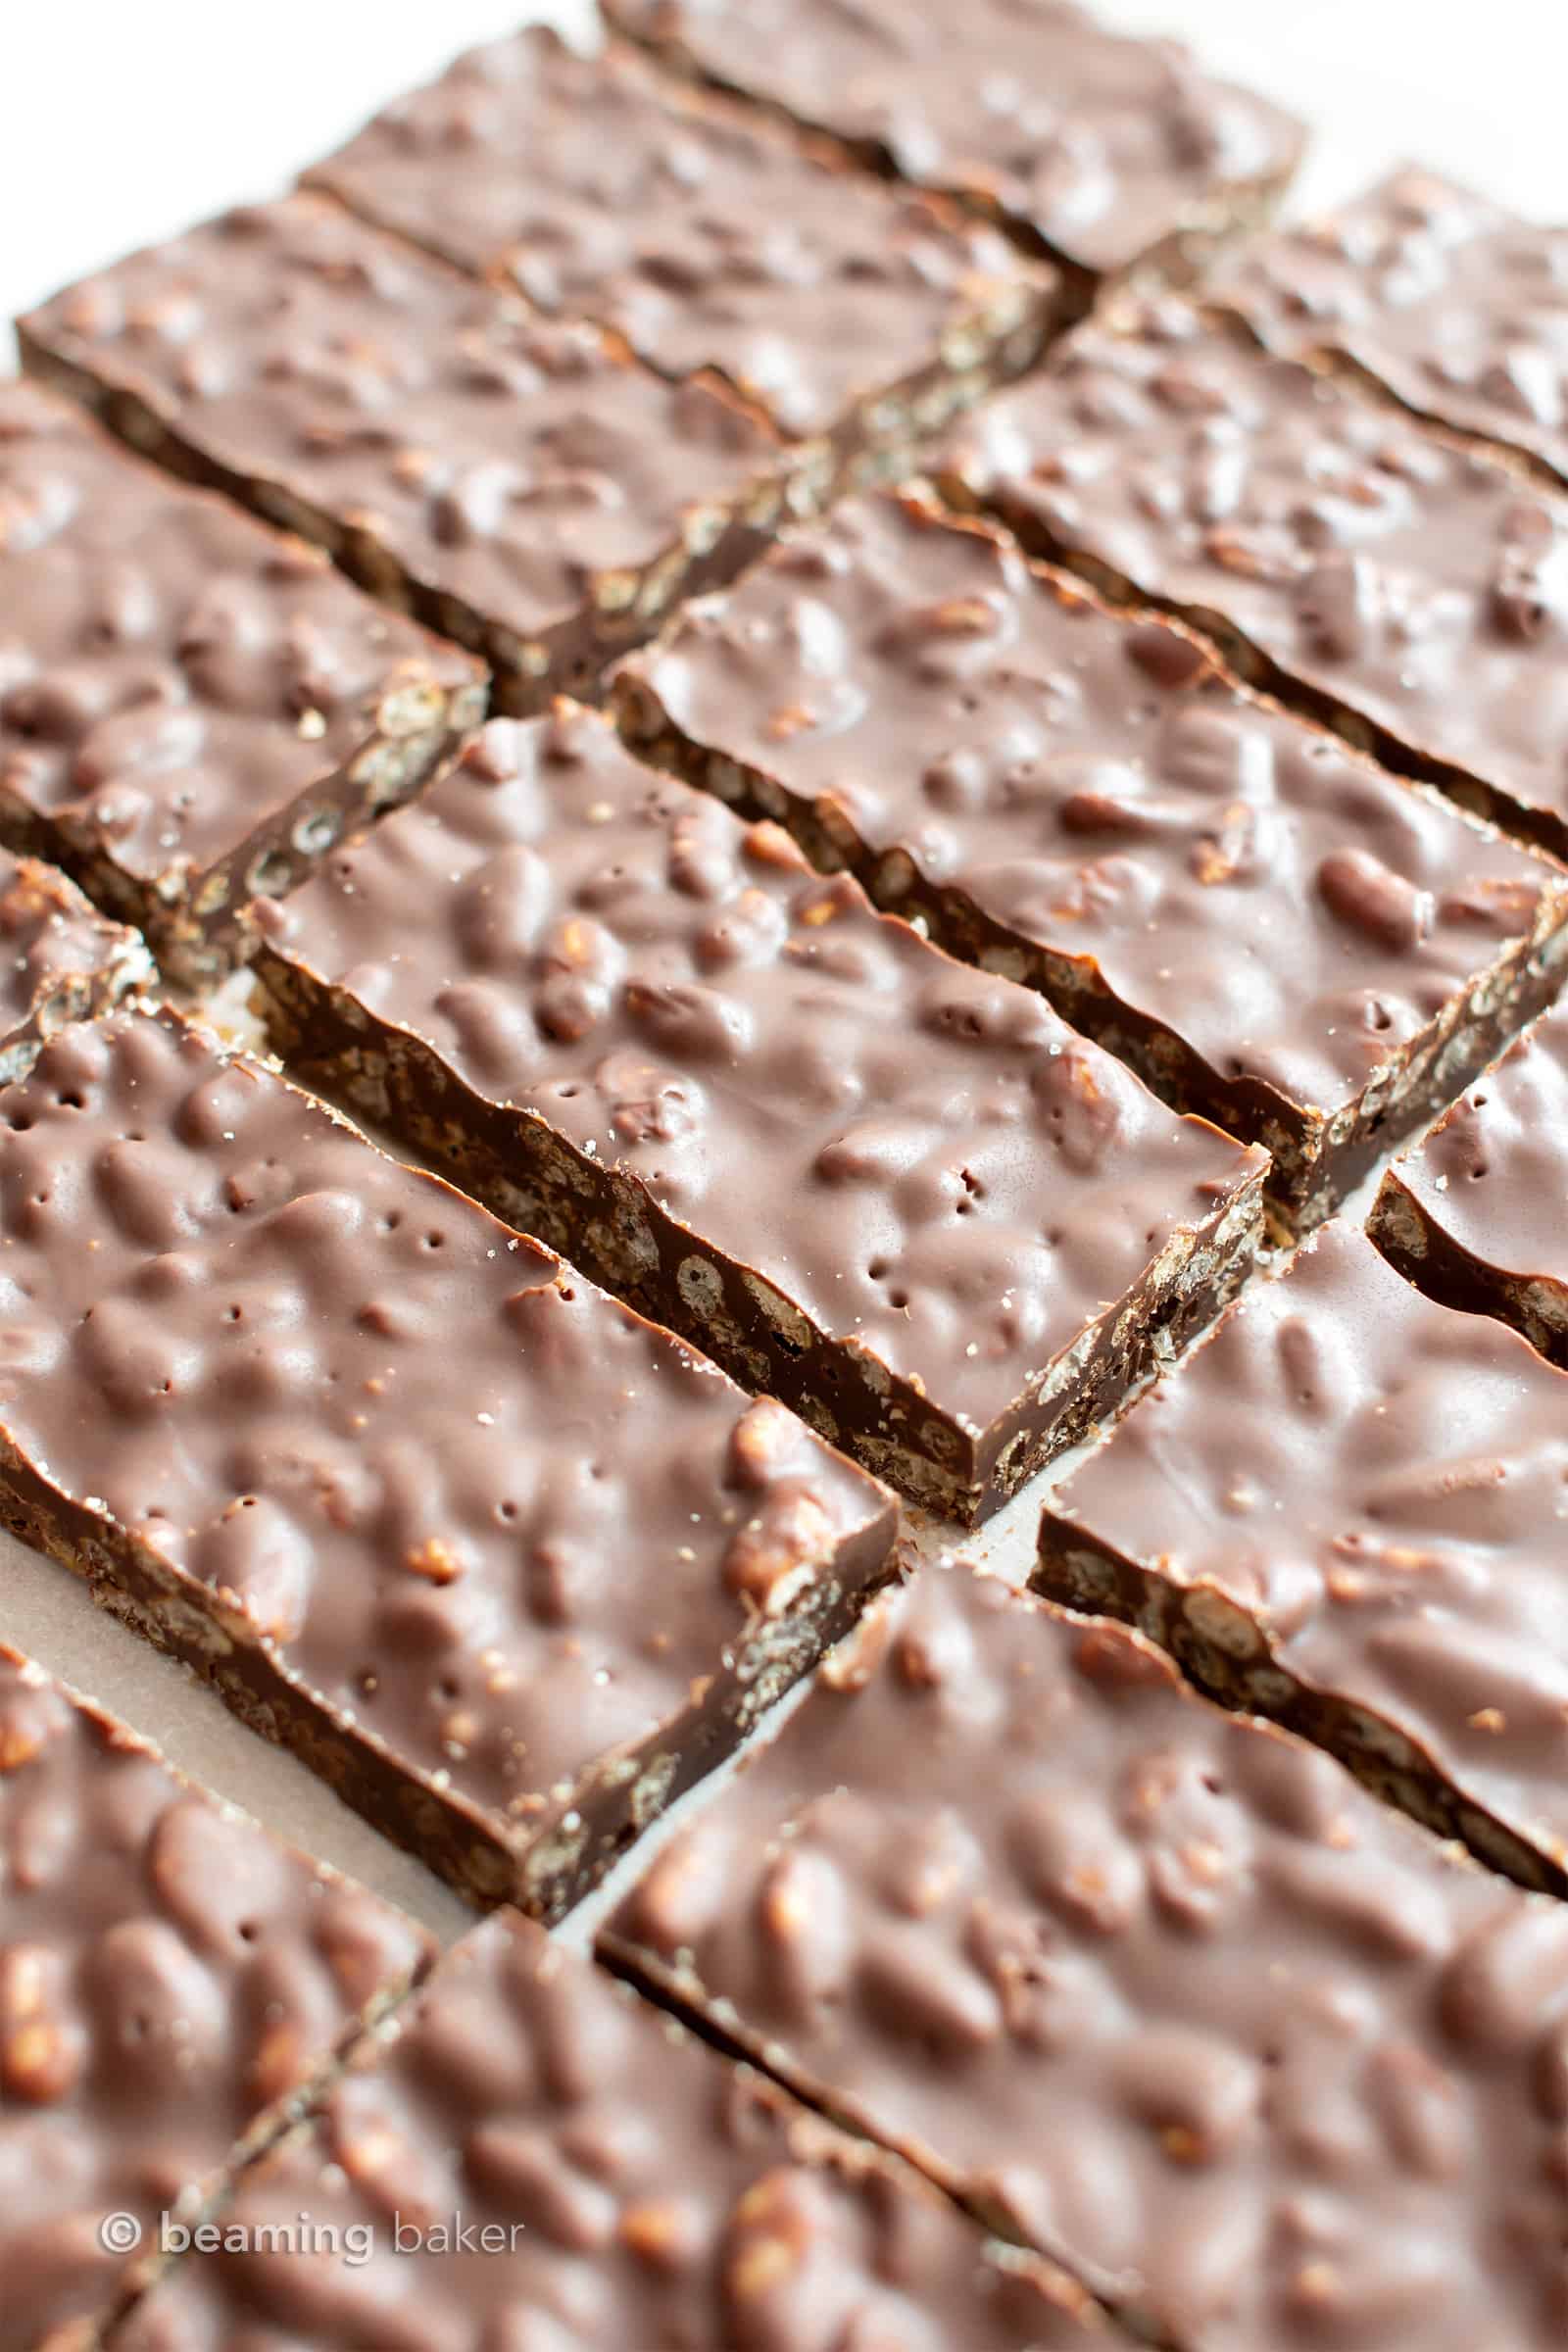 Angled view of chocolate crunch bars